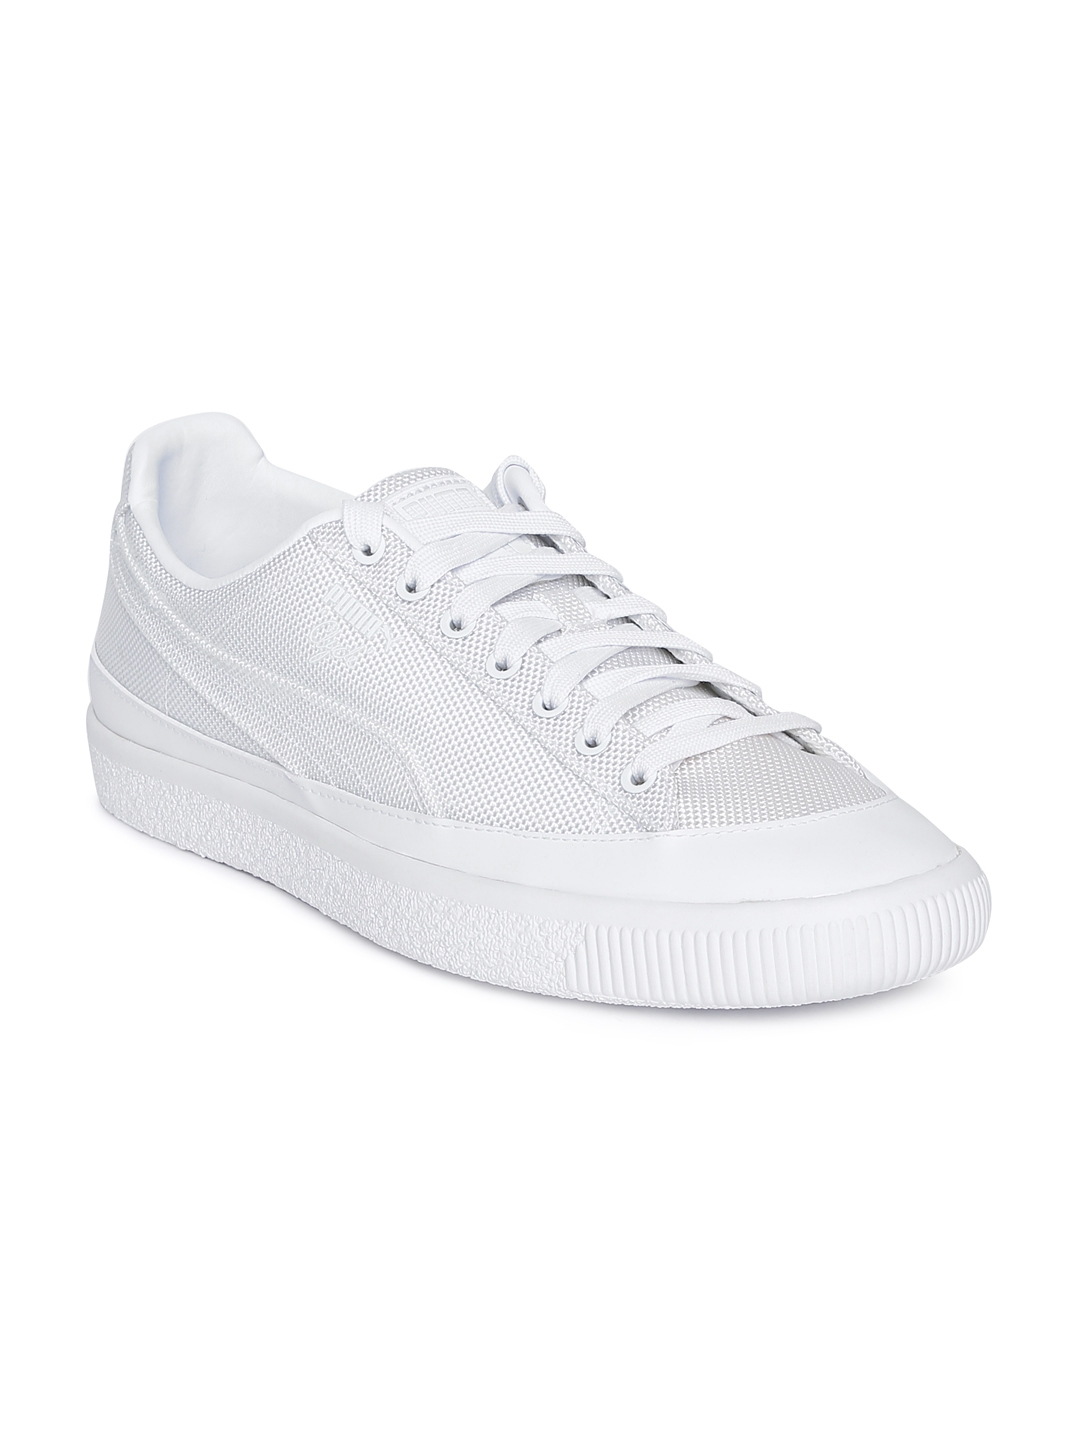 Buy Puma Men White Clyde Leather Sneakers - Casual Shoes for Men ...